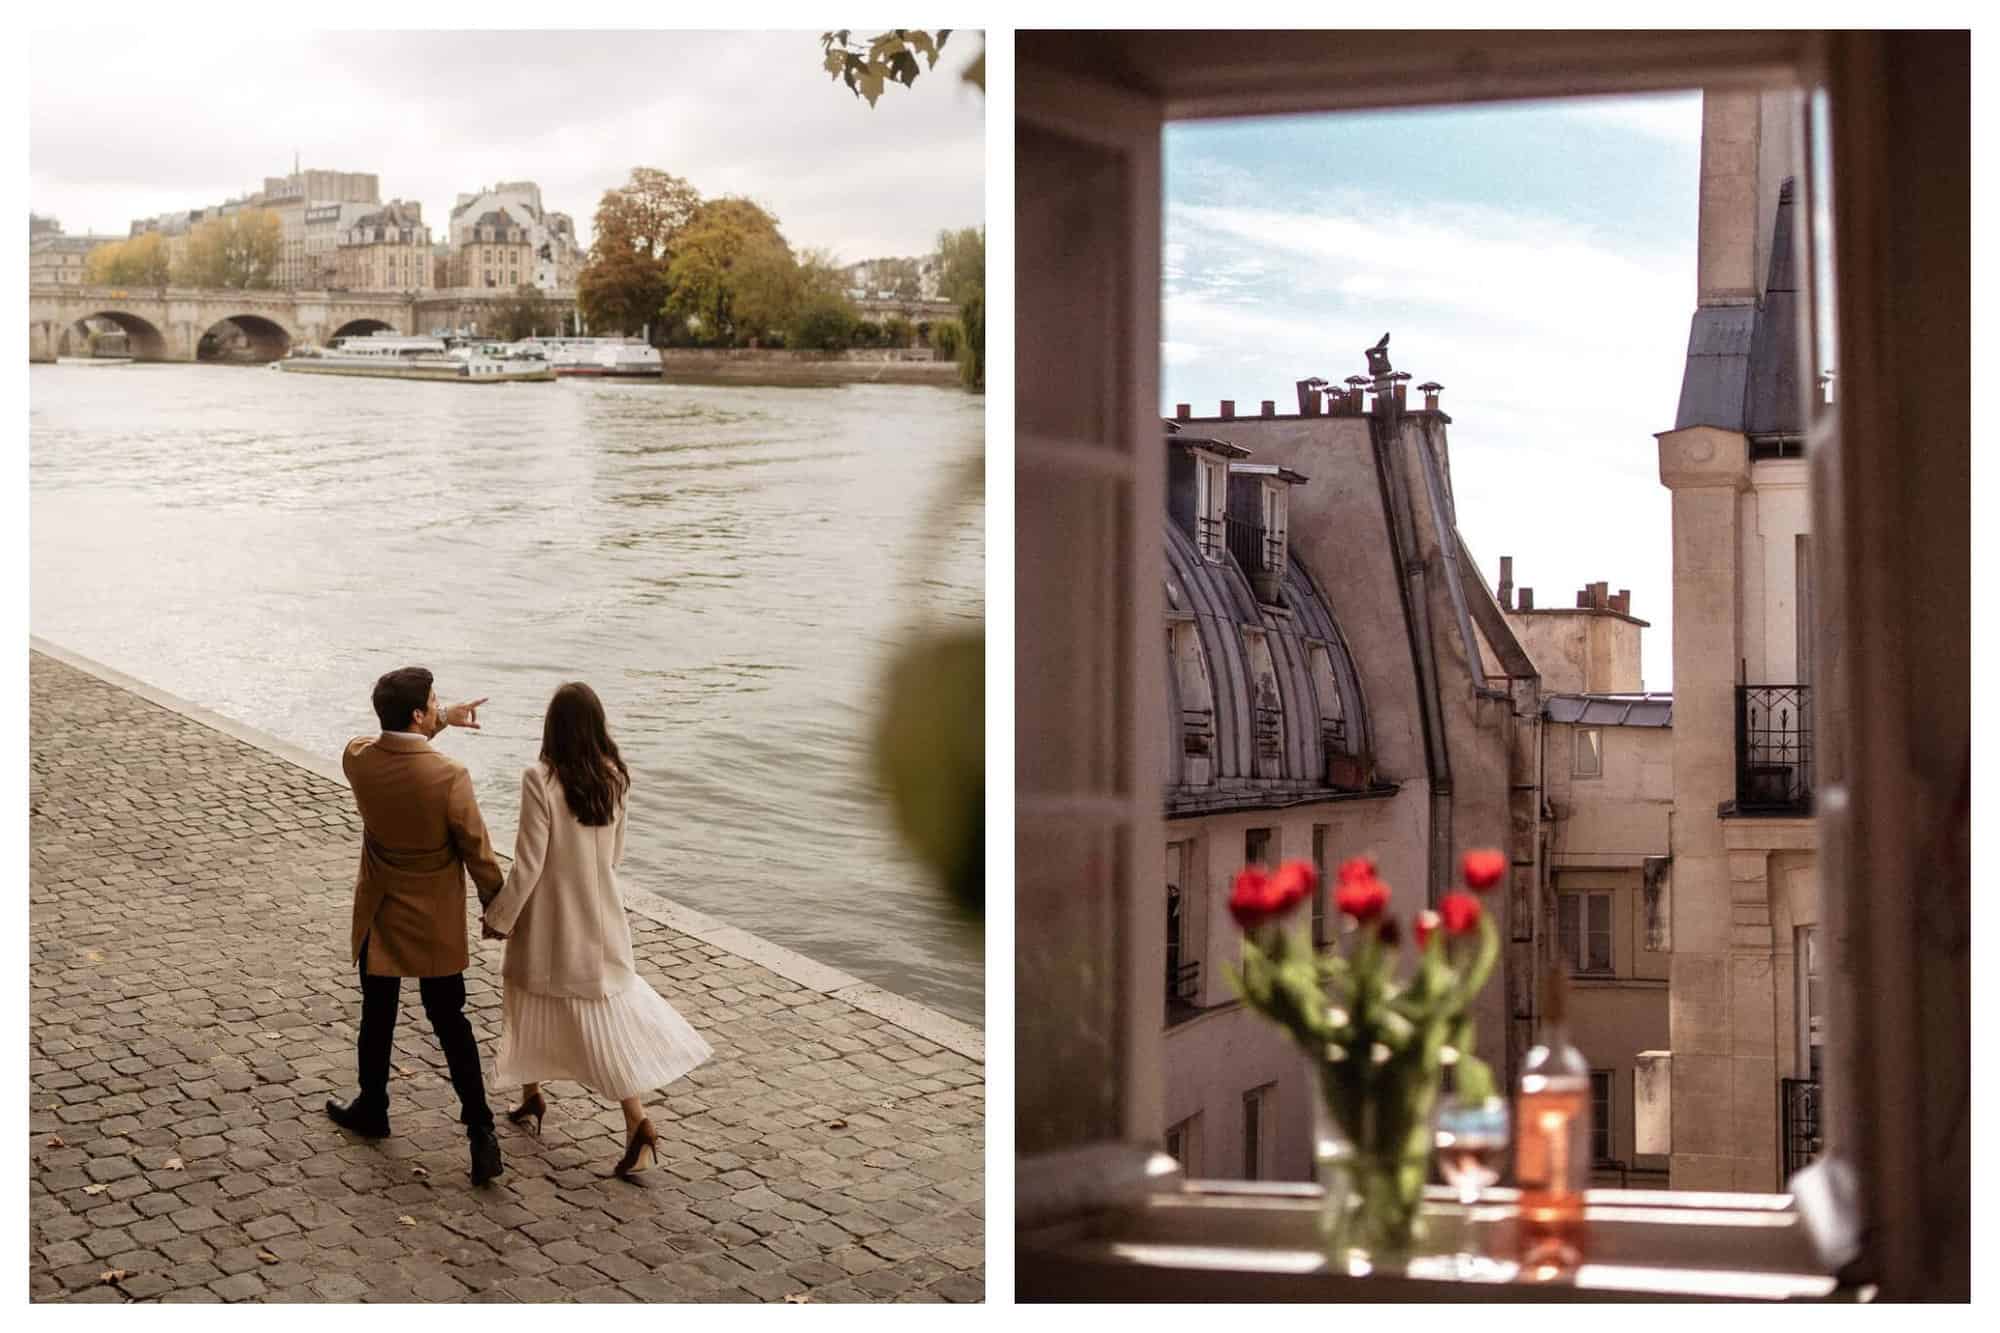 Left: A couple walks by the Seine in Paris. They are holding hands with their backs facing the camera, the man is pointing towards something in the distance. Right: A window is open, showing traditional Parisian buildings. On the ledge, there are red flowers, a bottle of Rosé wine and a glass filled with wine. 